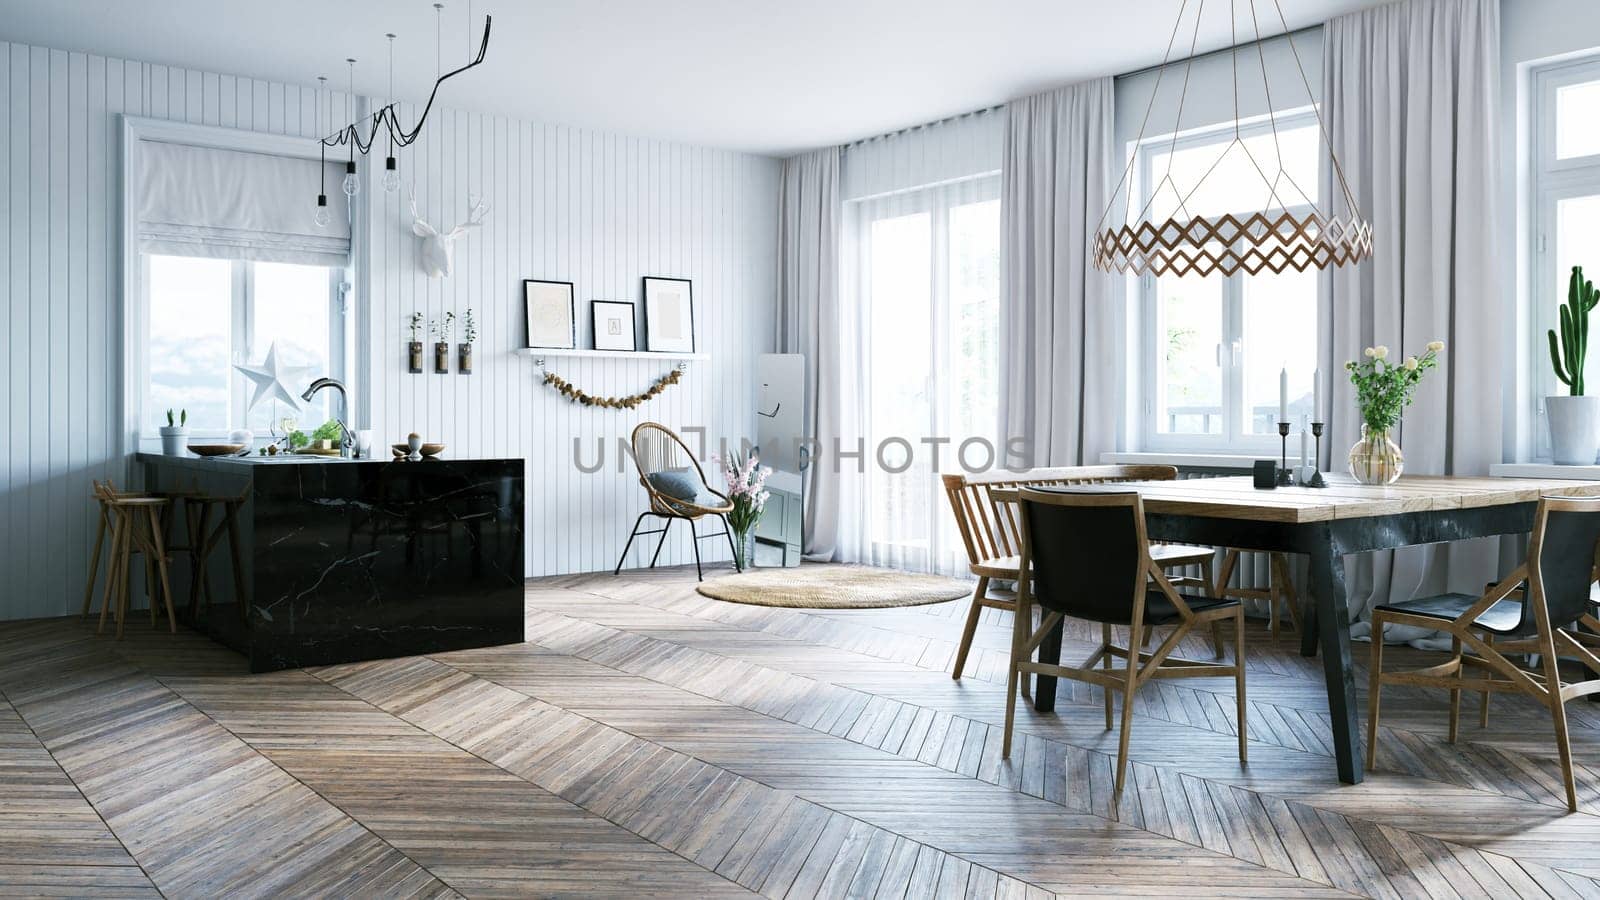 Interior of dining room with table, chairs, big window, and elegant accessories in modern home decor. 3d render design